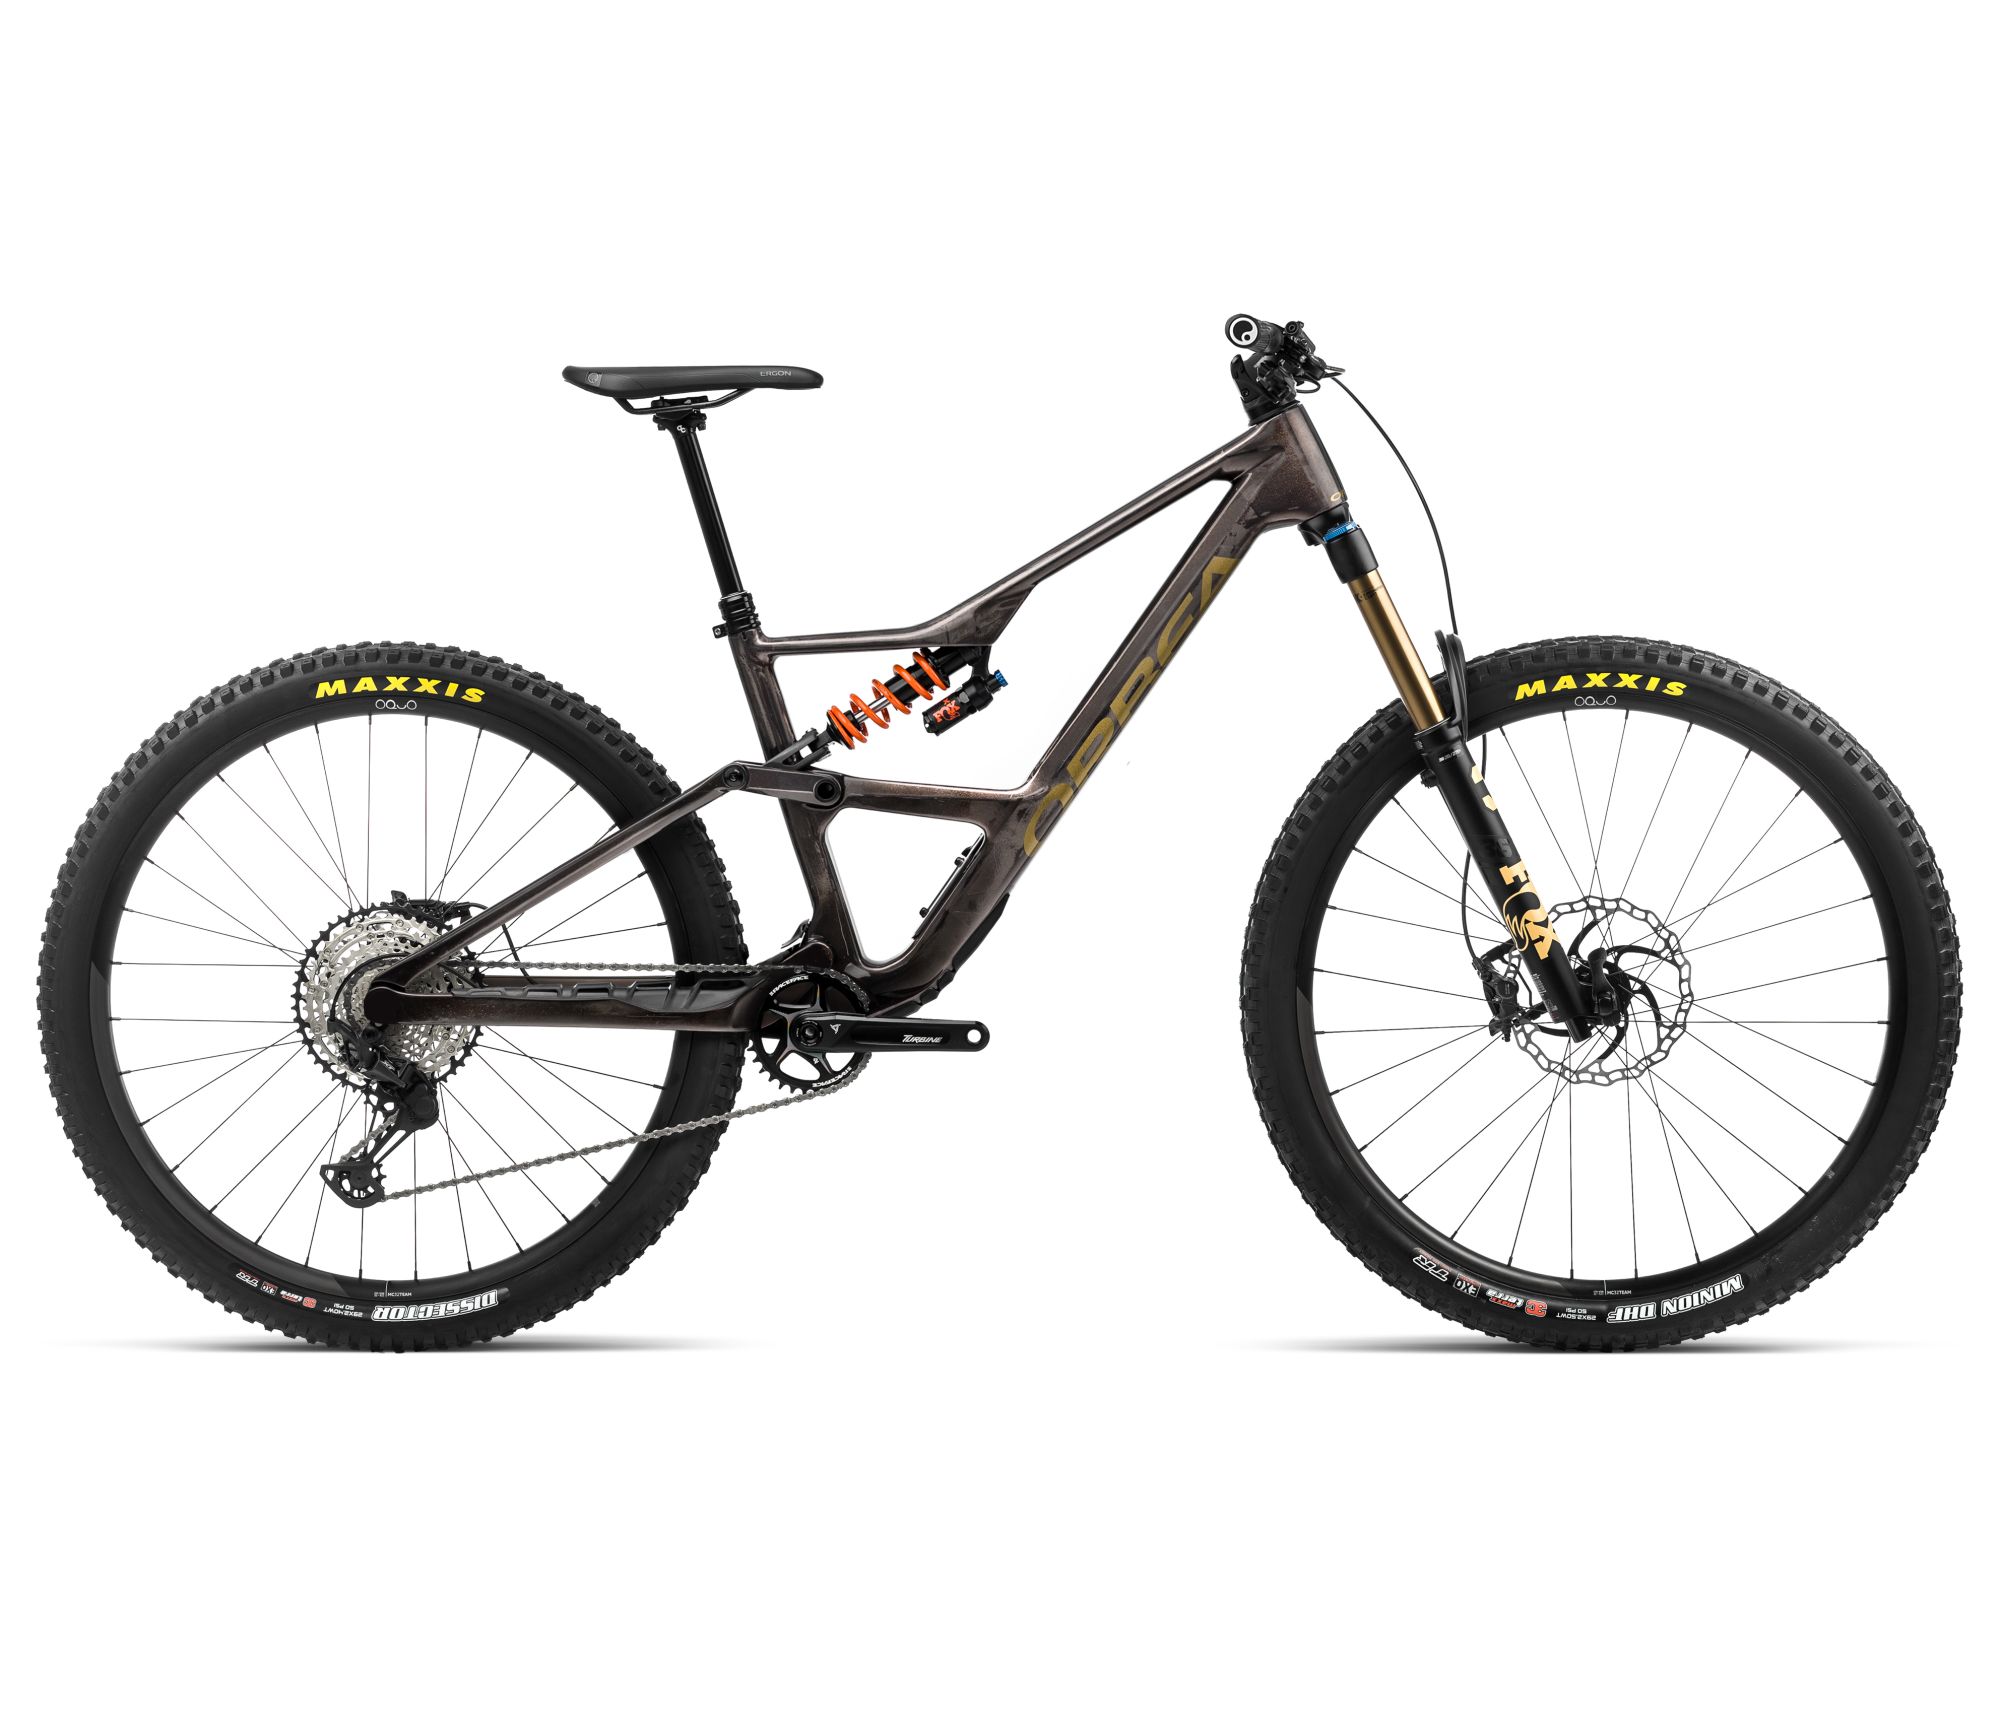 https://www.orbea.com/img/products/product/large/R266TTCC-P5-SIDE-OCCAM_LT_M10.jpg